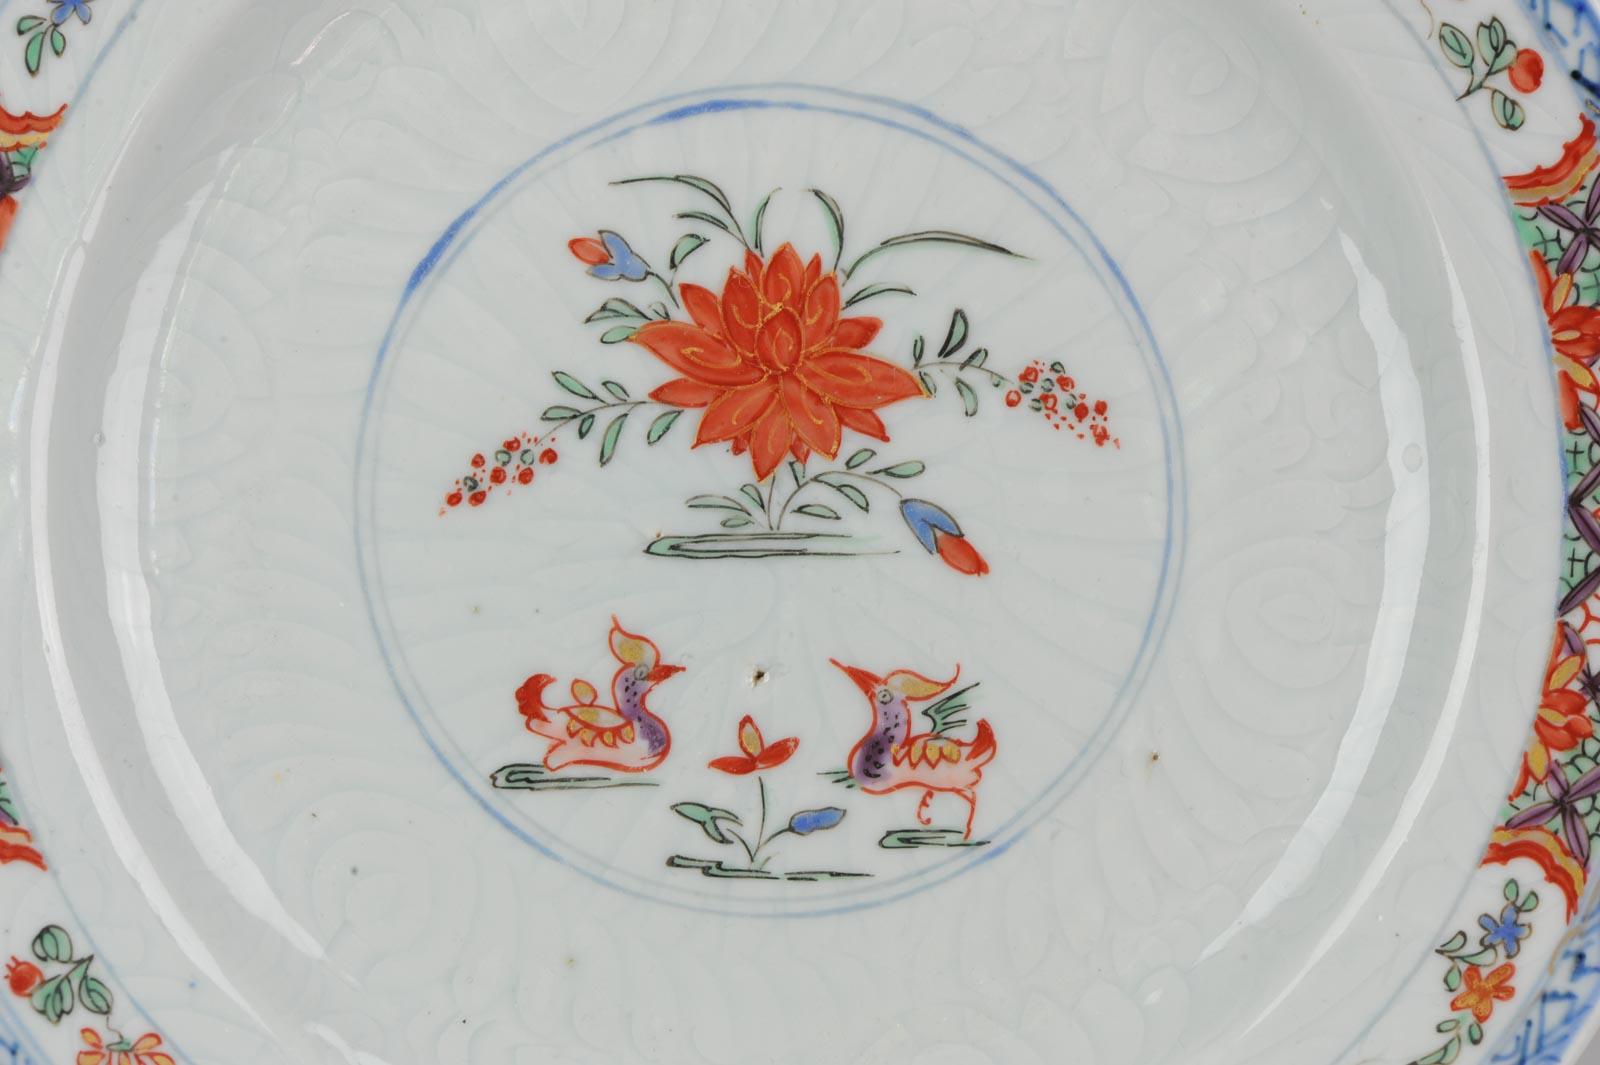 Antique Rare Famille Verte 18th Century Chinese Porcelain Plate For Sale 3